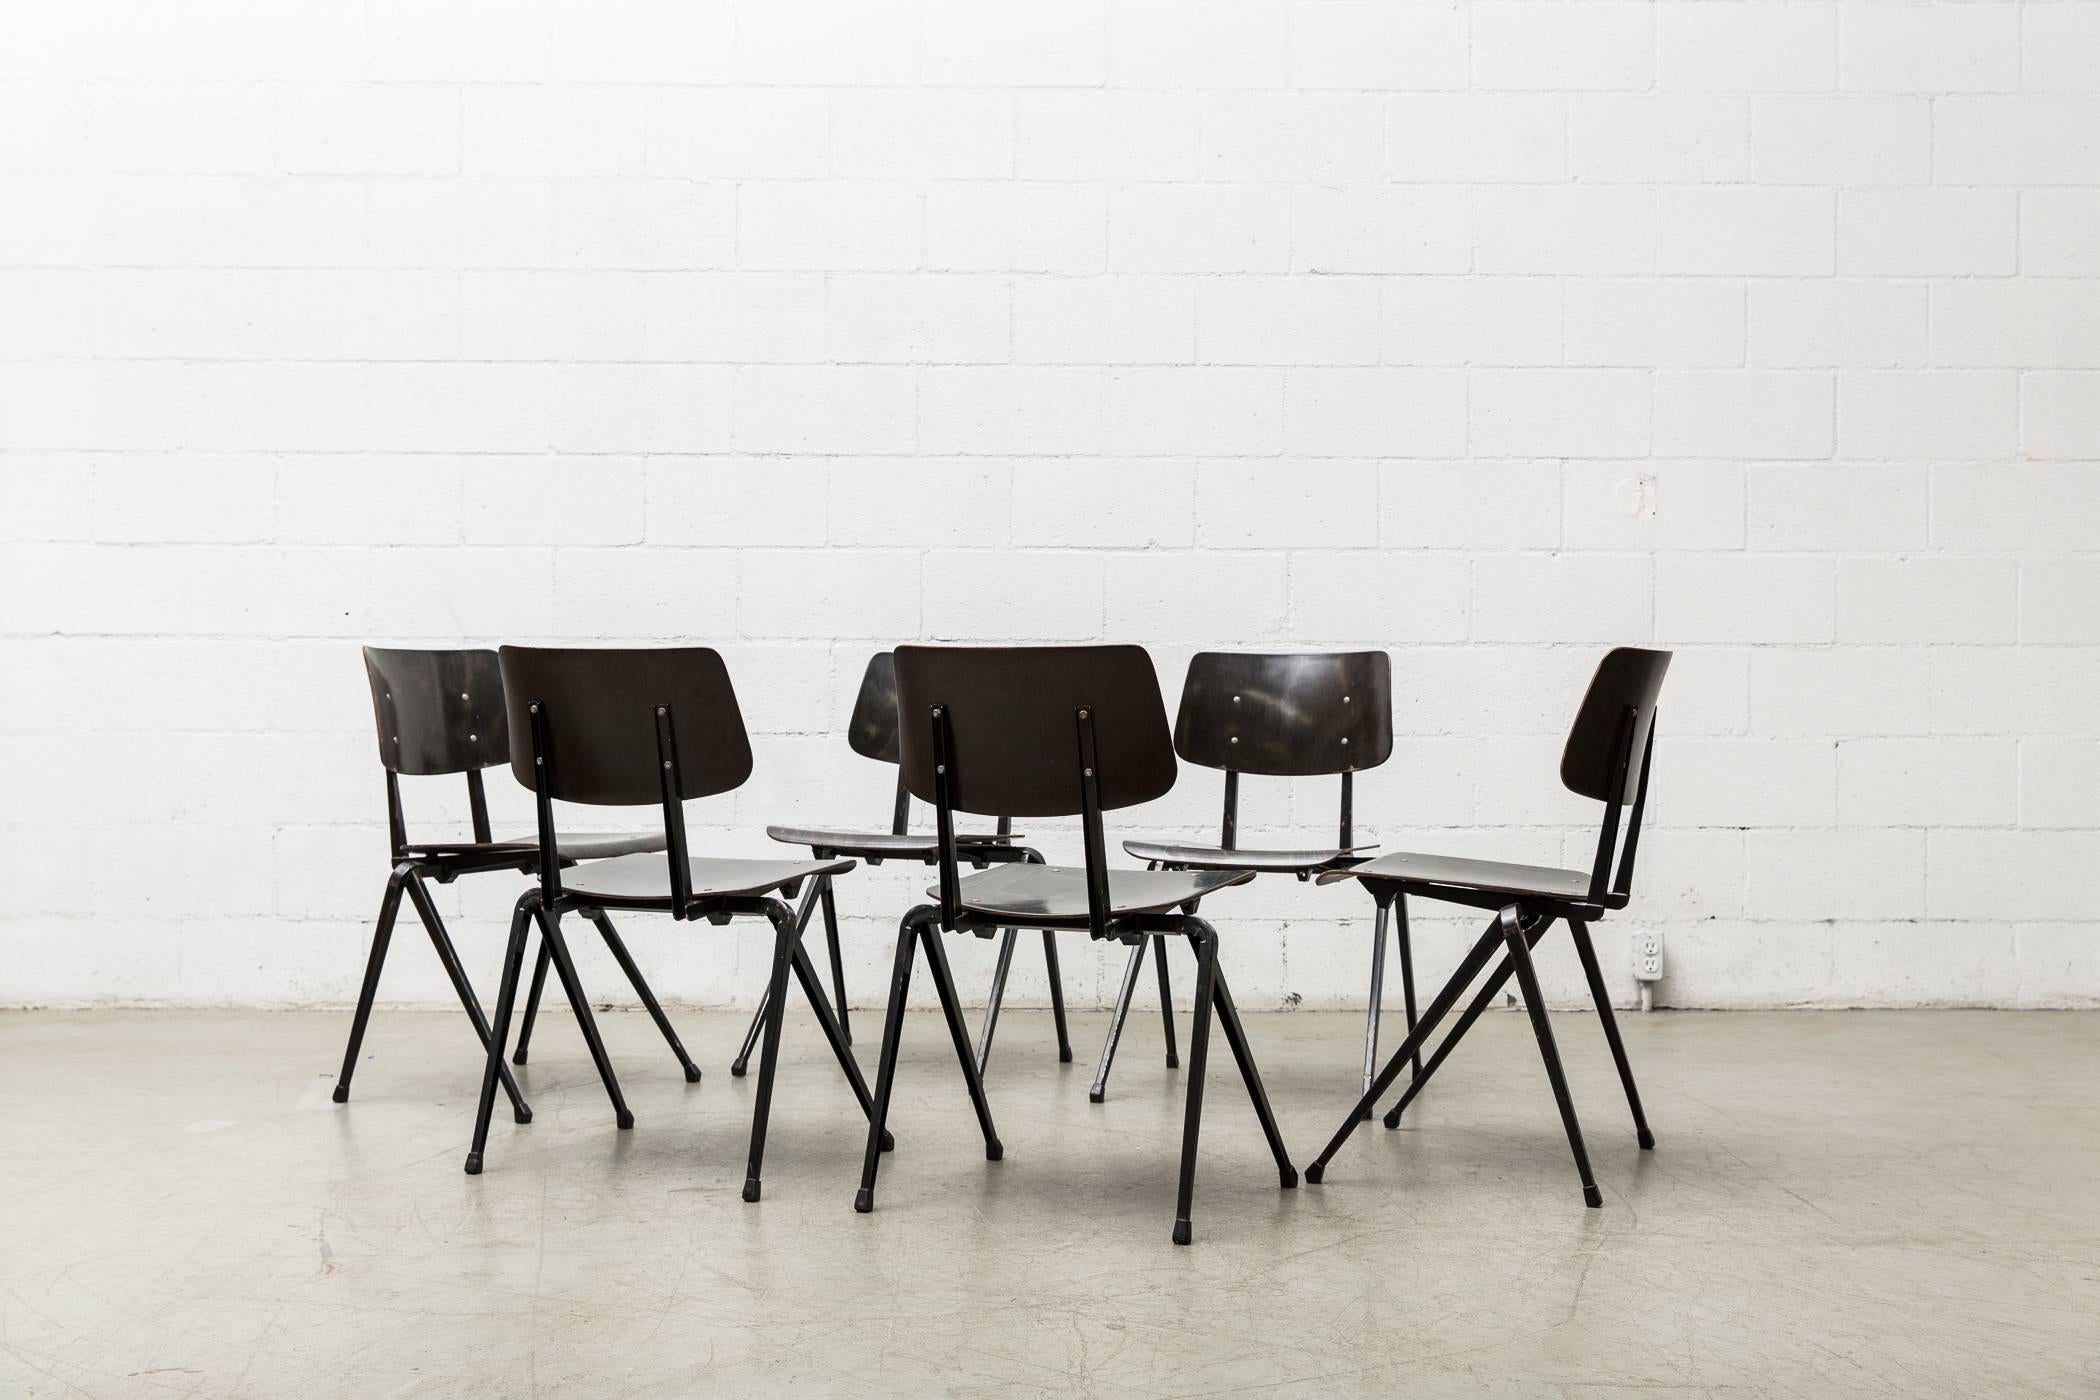 Mid-20th Century Prouve Style Stacking Industrial School Chairs